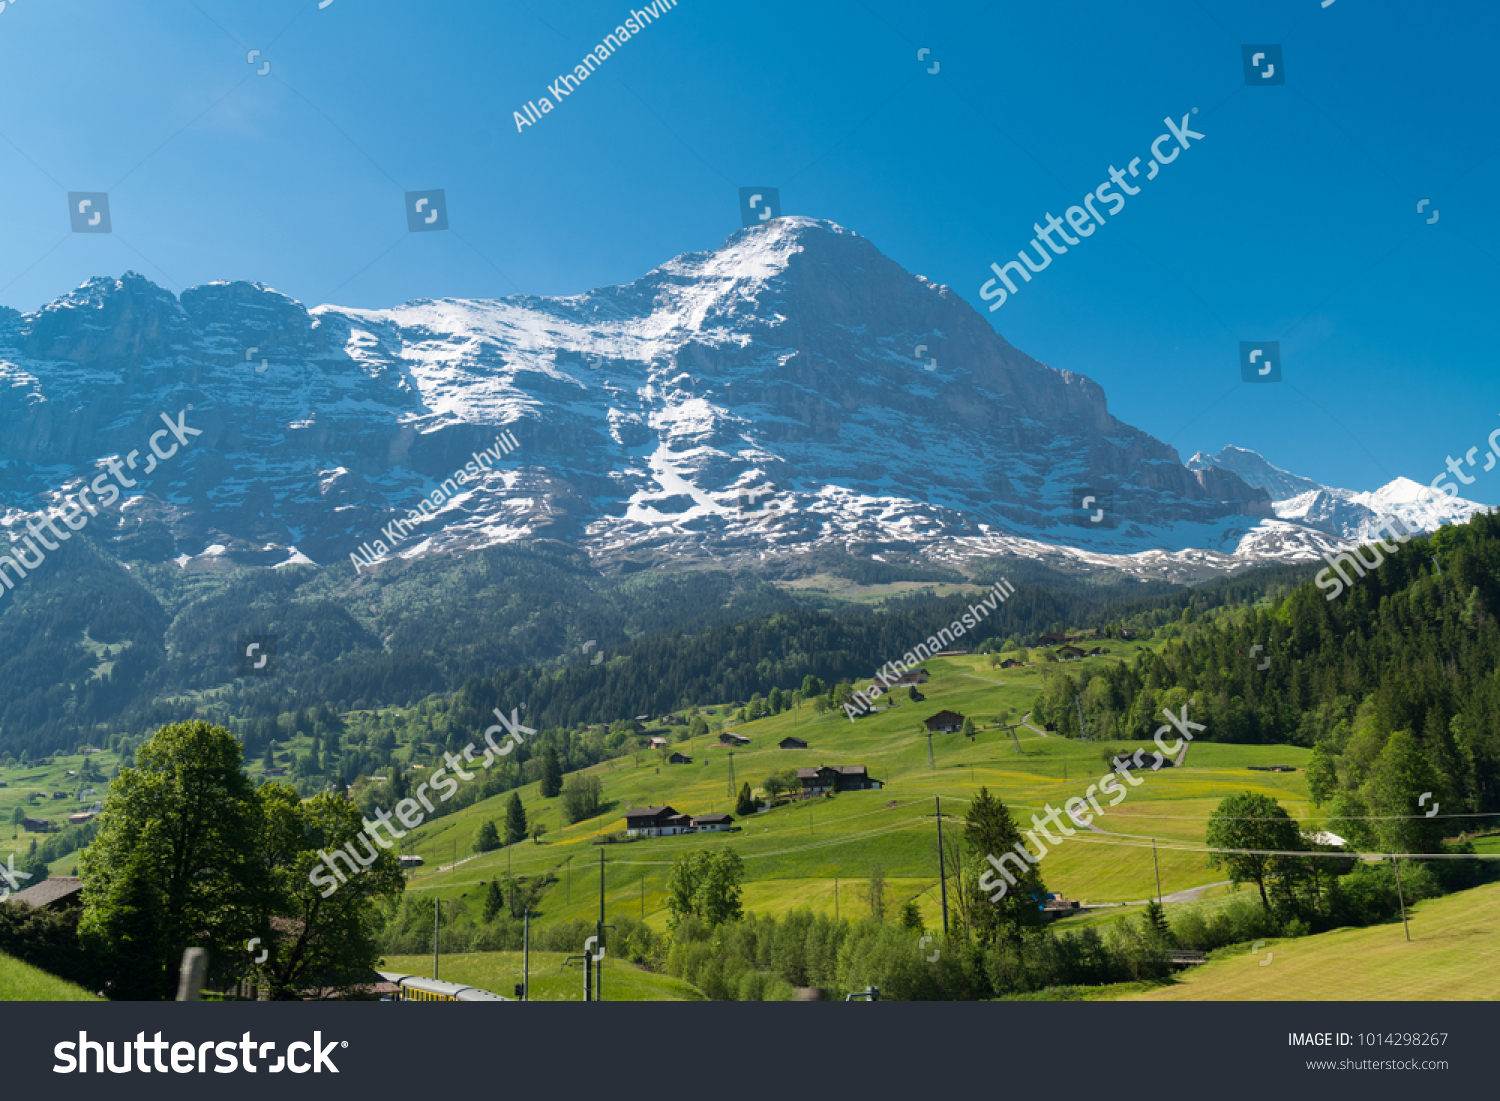 Spectacular view of the mountain Jungfrau and the four thousand meter peaks in the Bernese Alps from Greendeltwald valley, Switzerland #1014298267